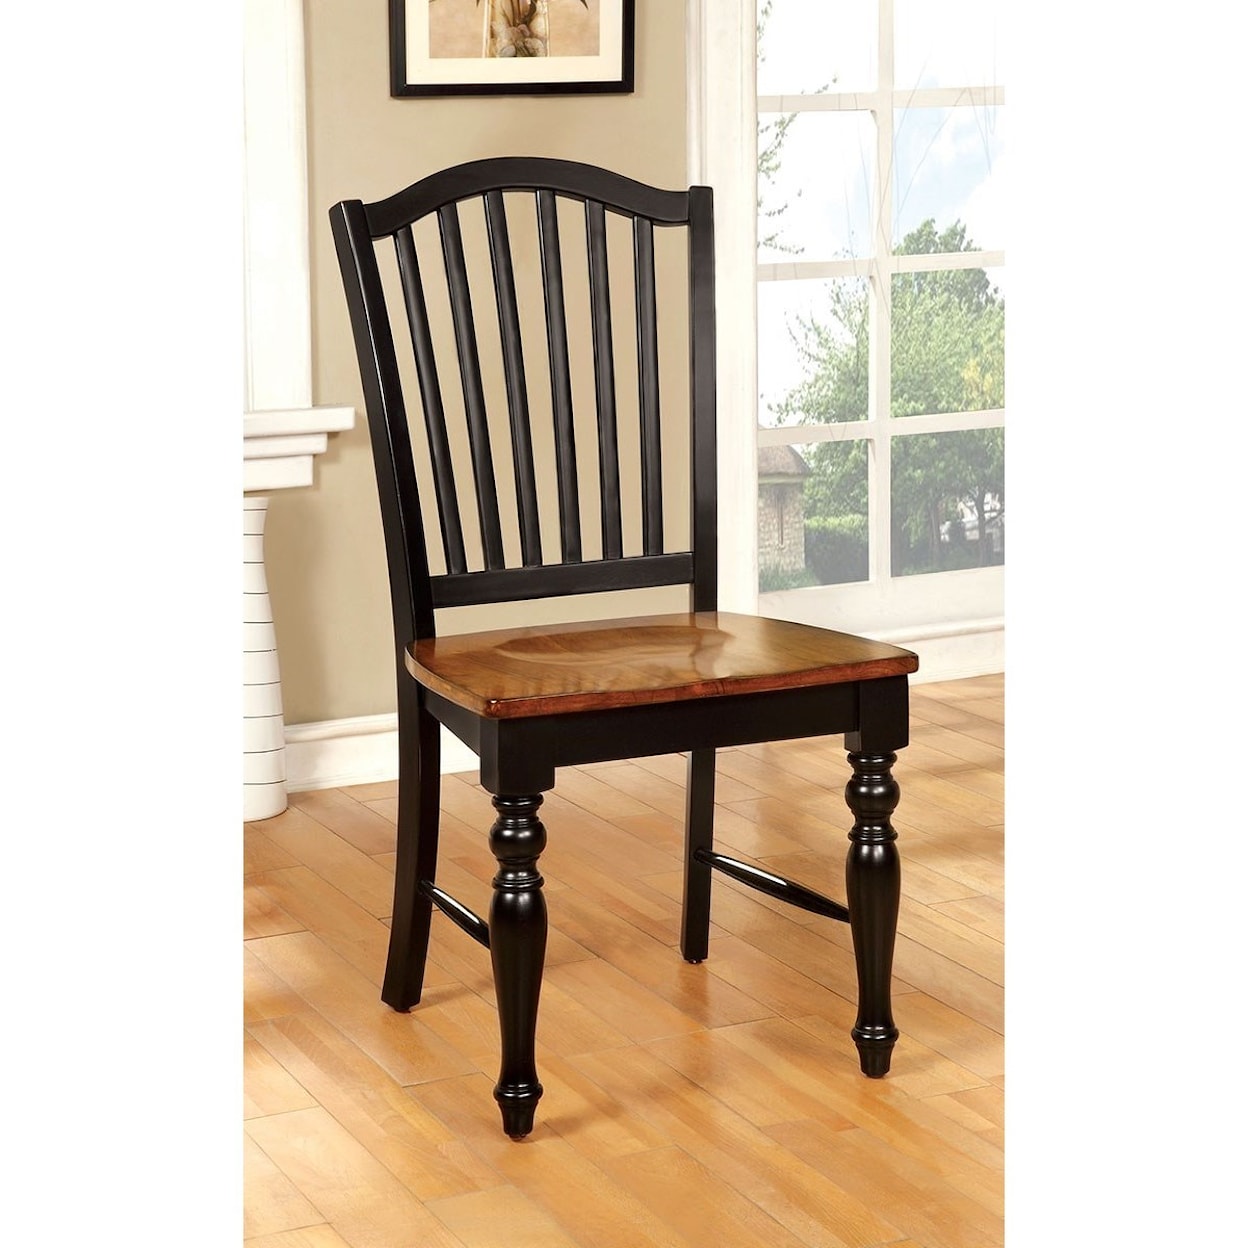 FUSA Mayville Set of 2 Side Chairs